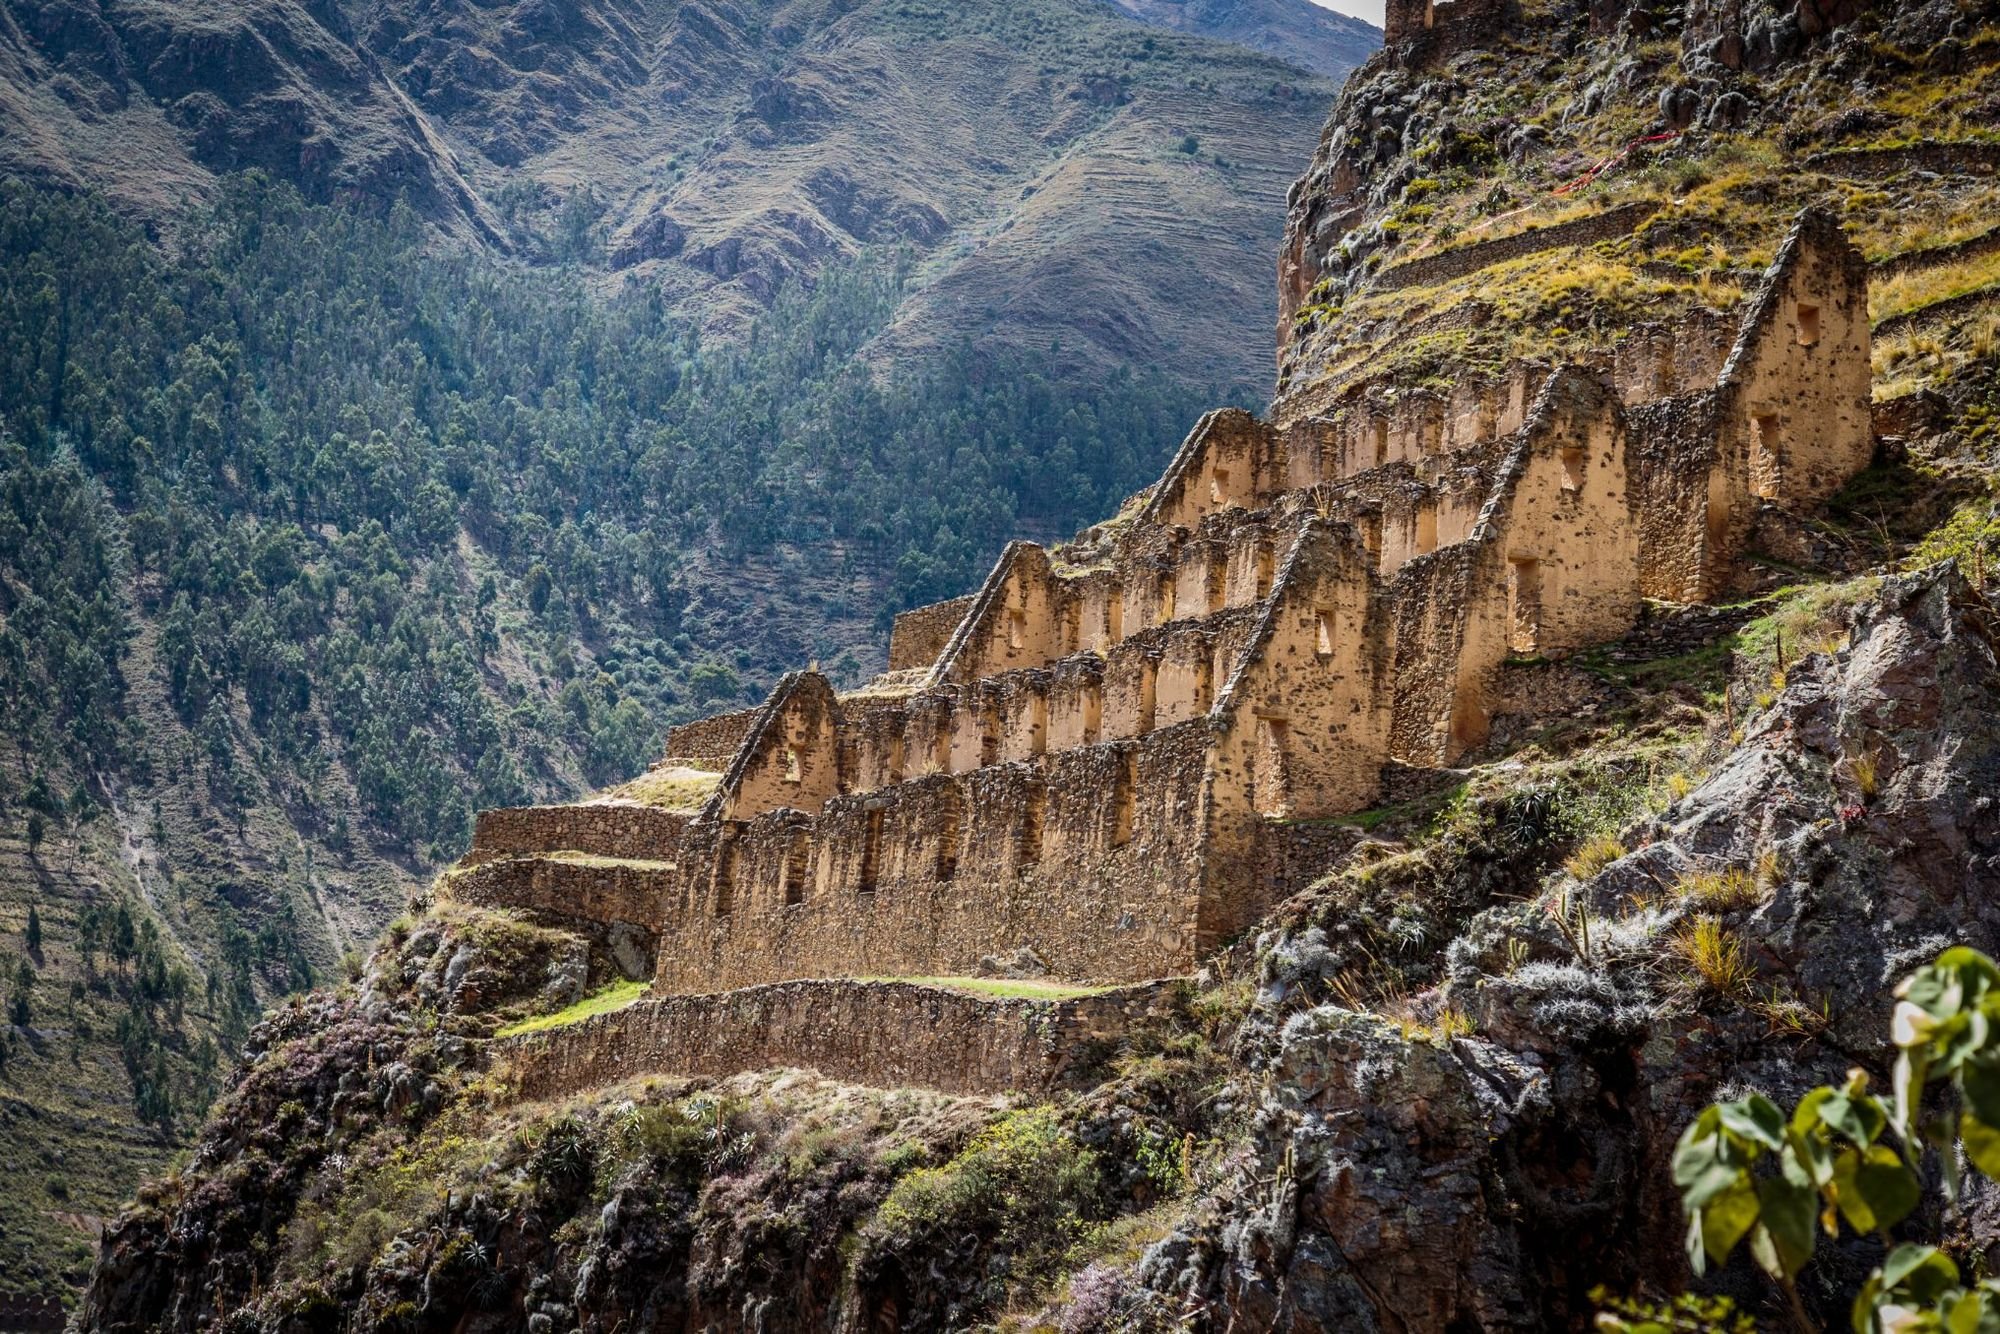 The high terraces above Ollantaytambo, Peru, the site of a historic Inca victory over the Spanish army. Photo: Getty